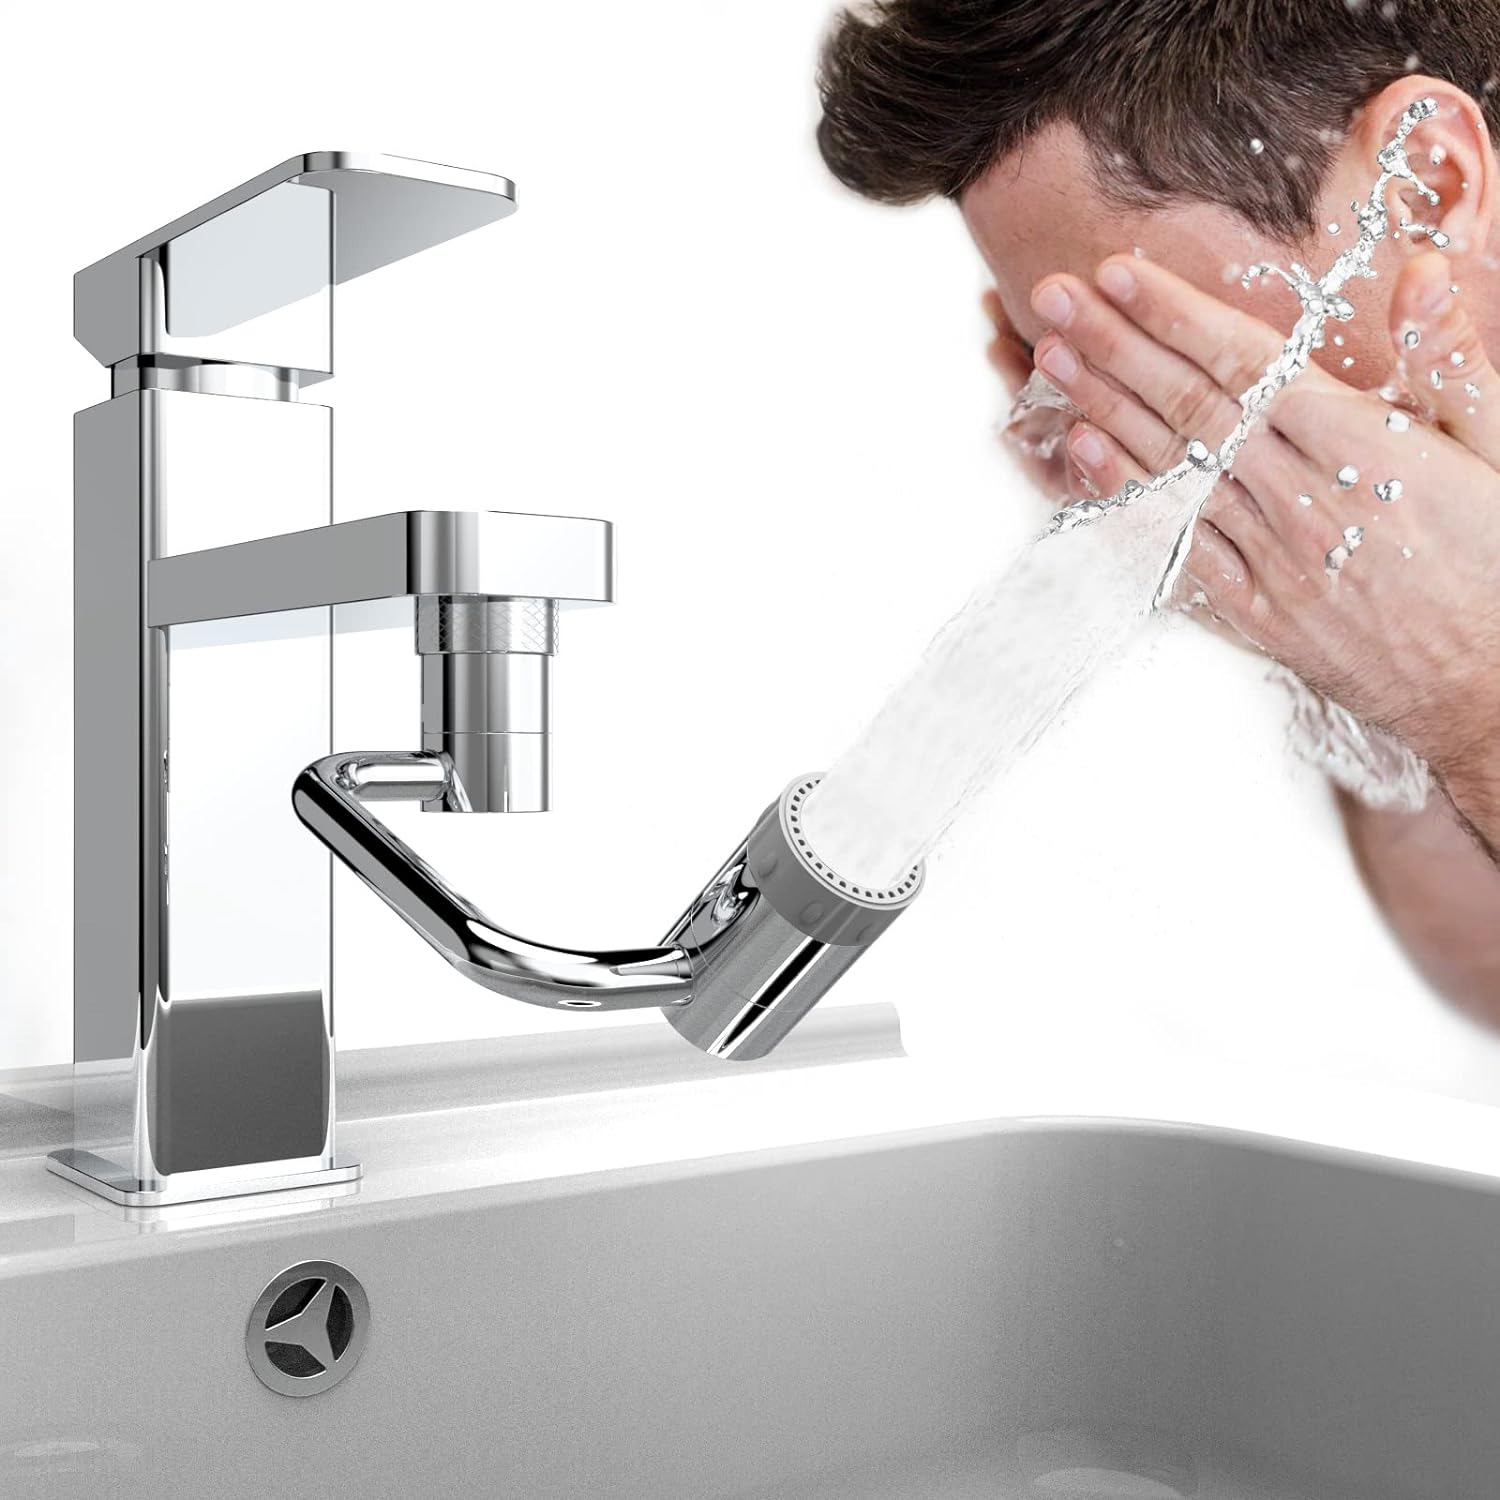 (🌲Early Christmas Sale- SAVE 48% OFF)1080° ROTATING SPLASH FILTER FAUCET(BUY 2 GET 1 FREE)